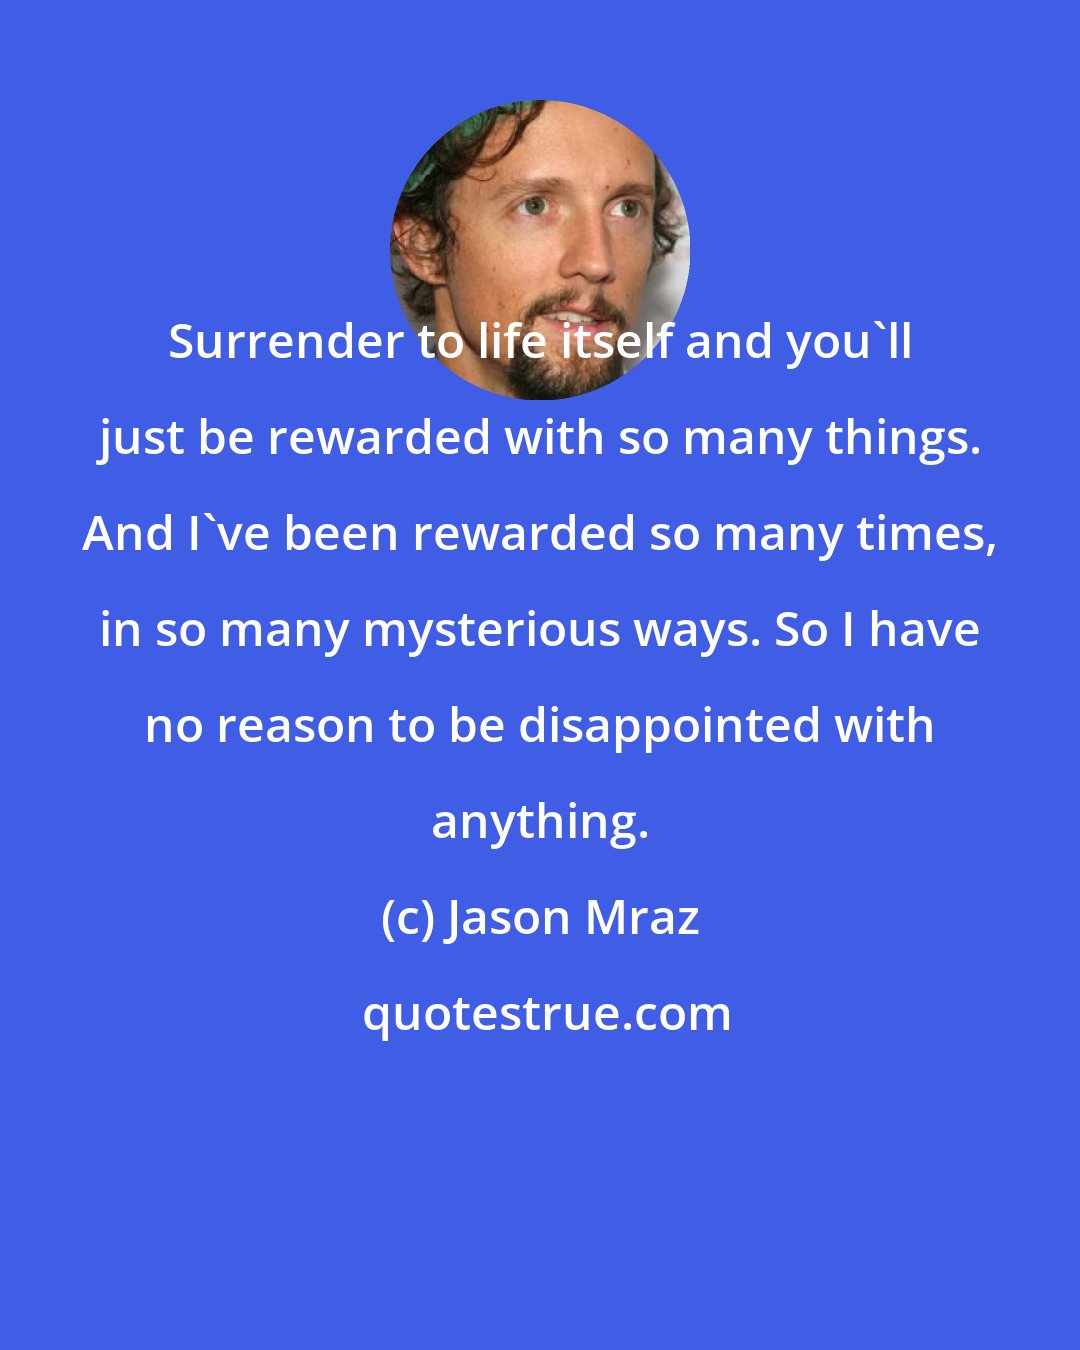 Jason Mraz: Surrender to life itself and you'll just be rewarded with so many things. And I've been rewarded so many times, in so many mysterious ways. So I have no reason to be disappointed with anything.